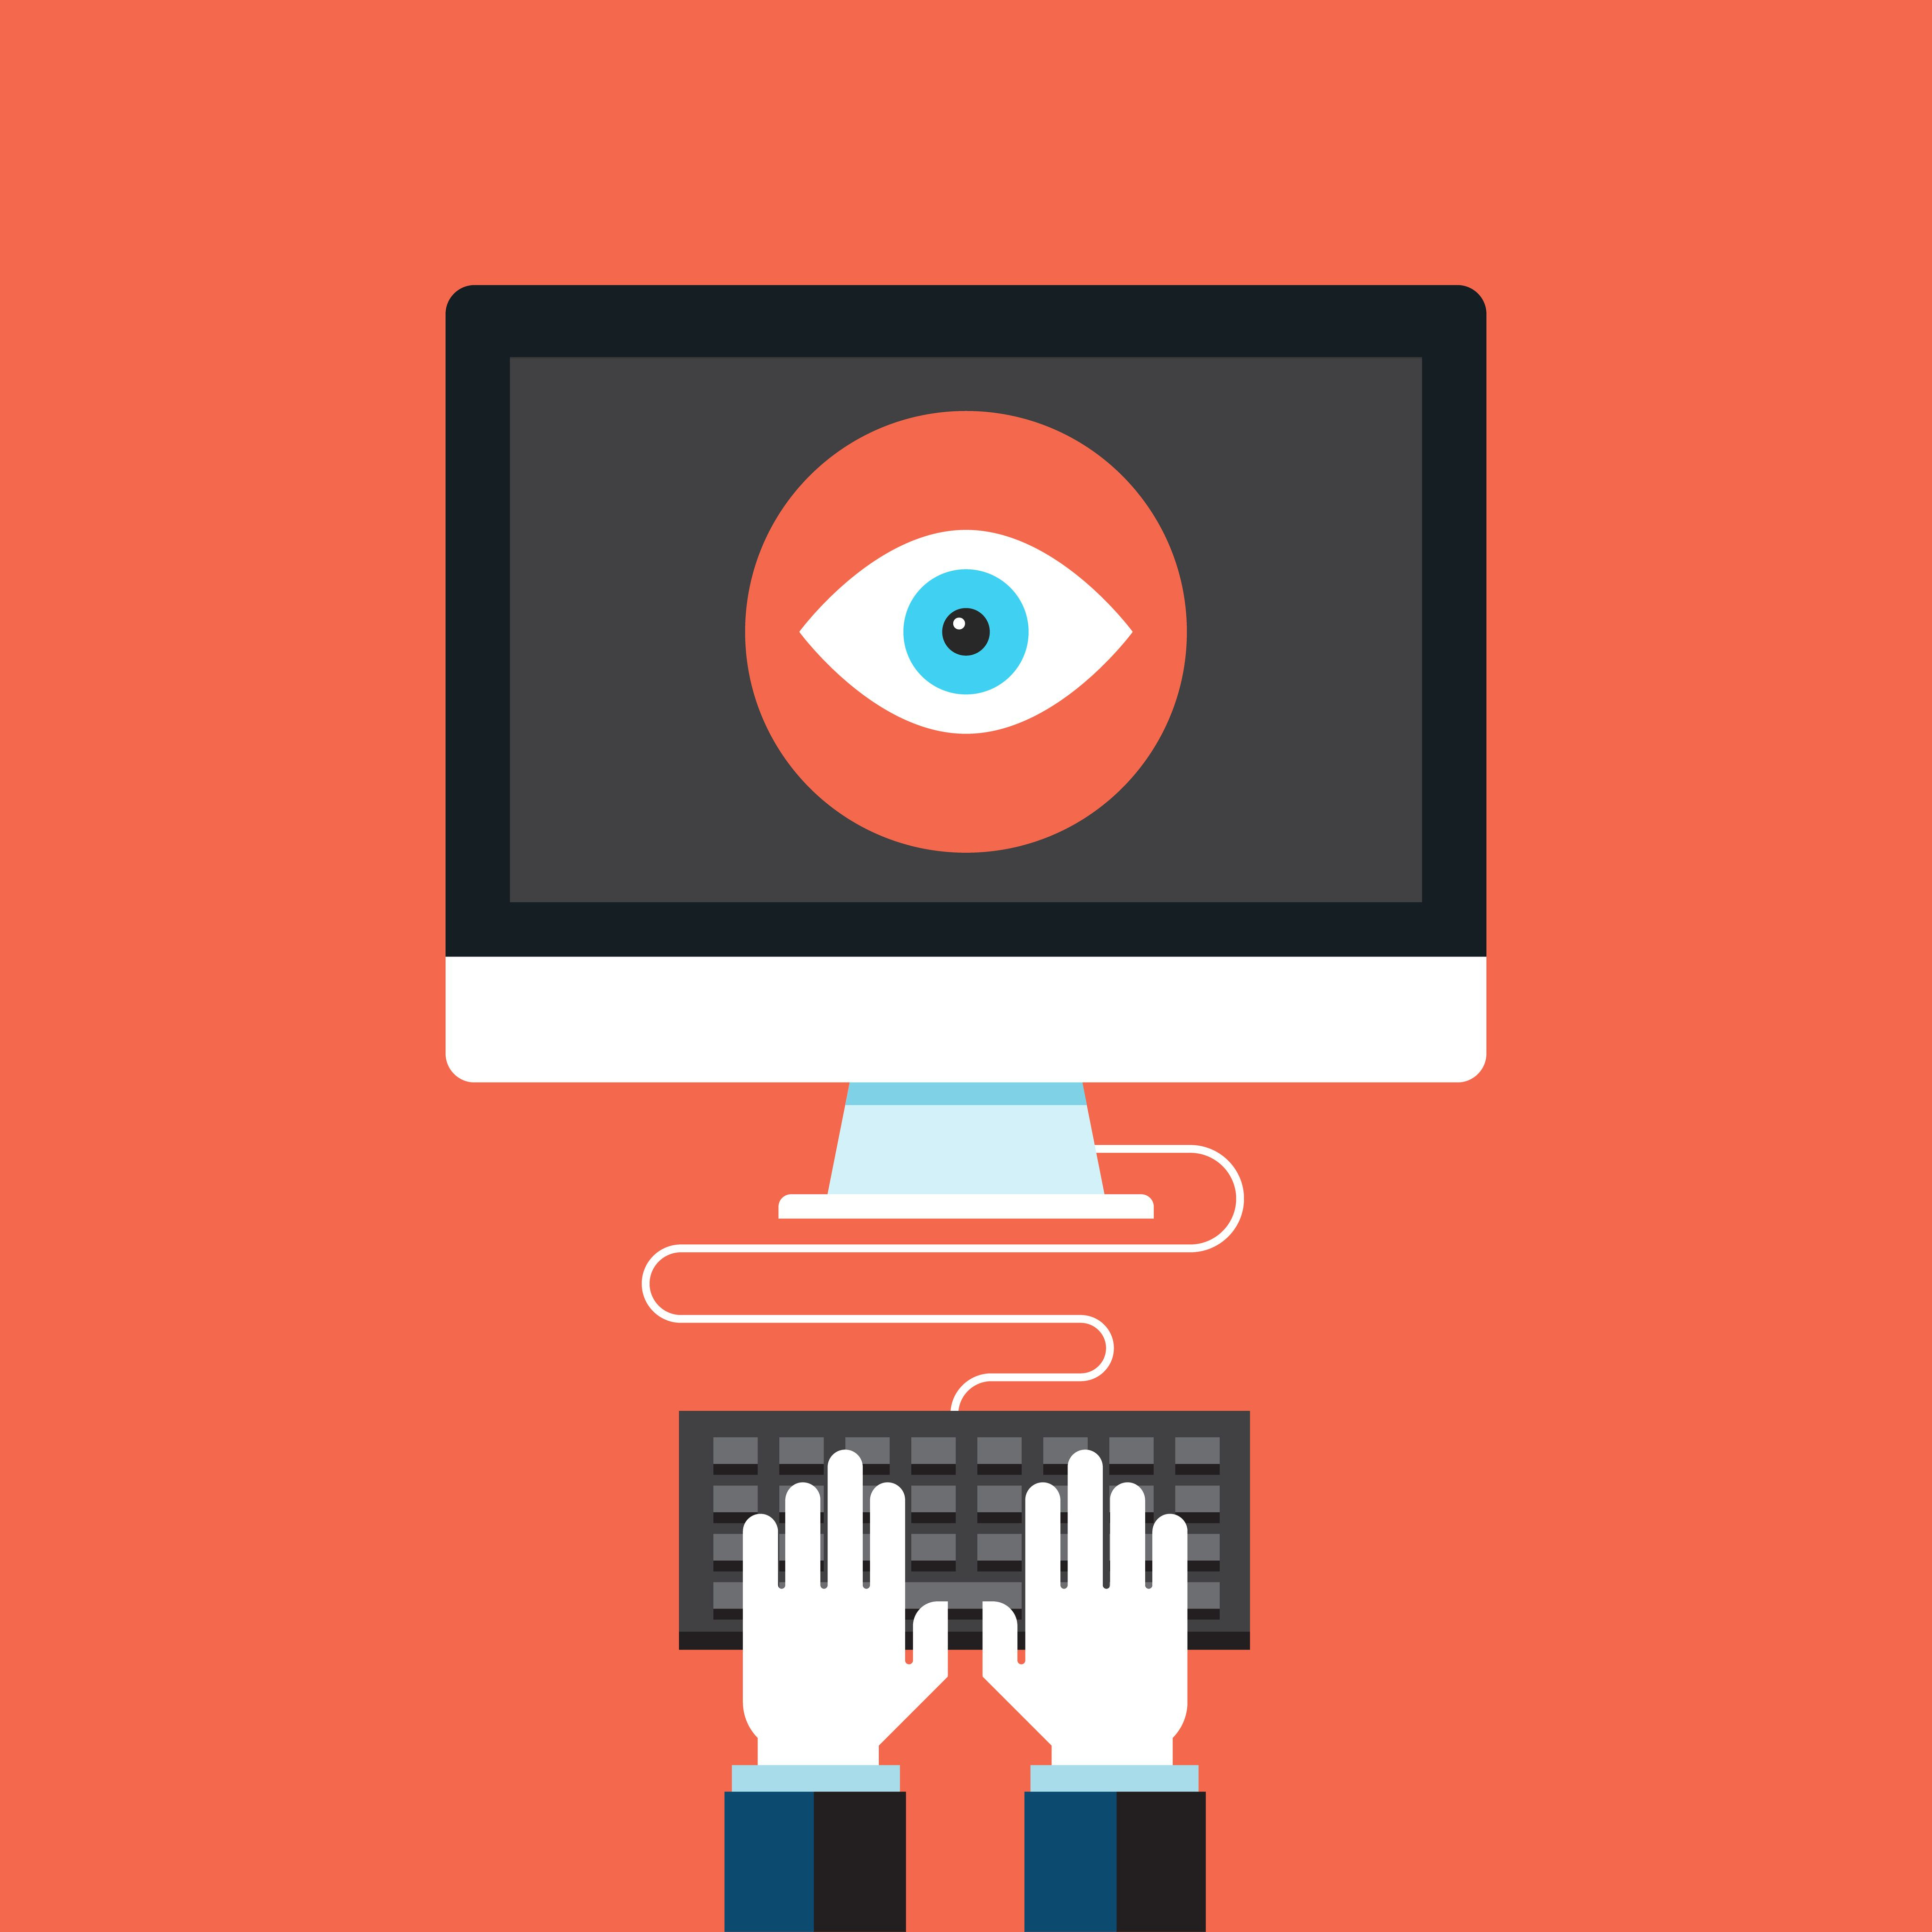 a cartoon picture of an eye on a computer monitor with a person's hands typing on a keyboard 